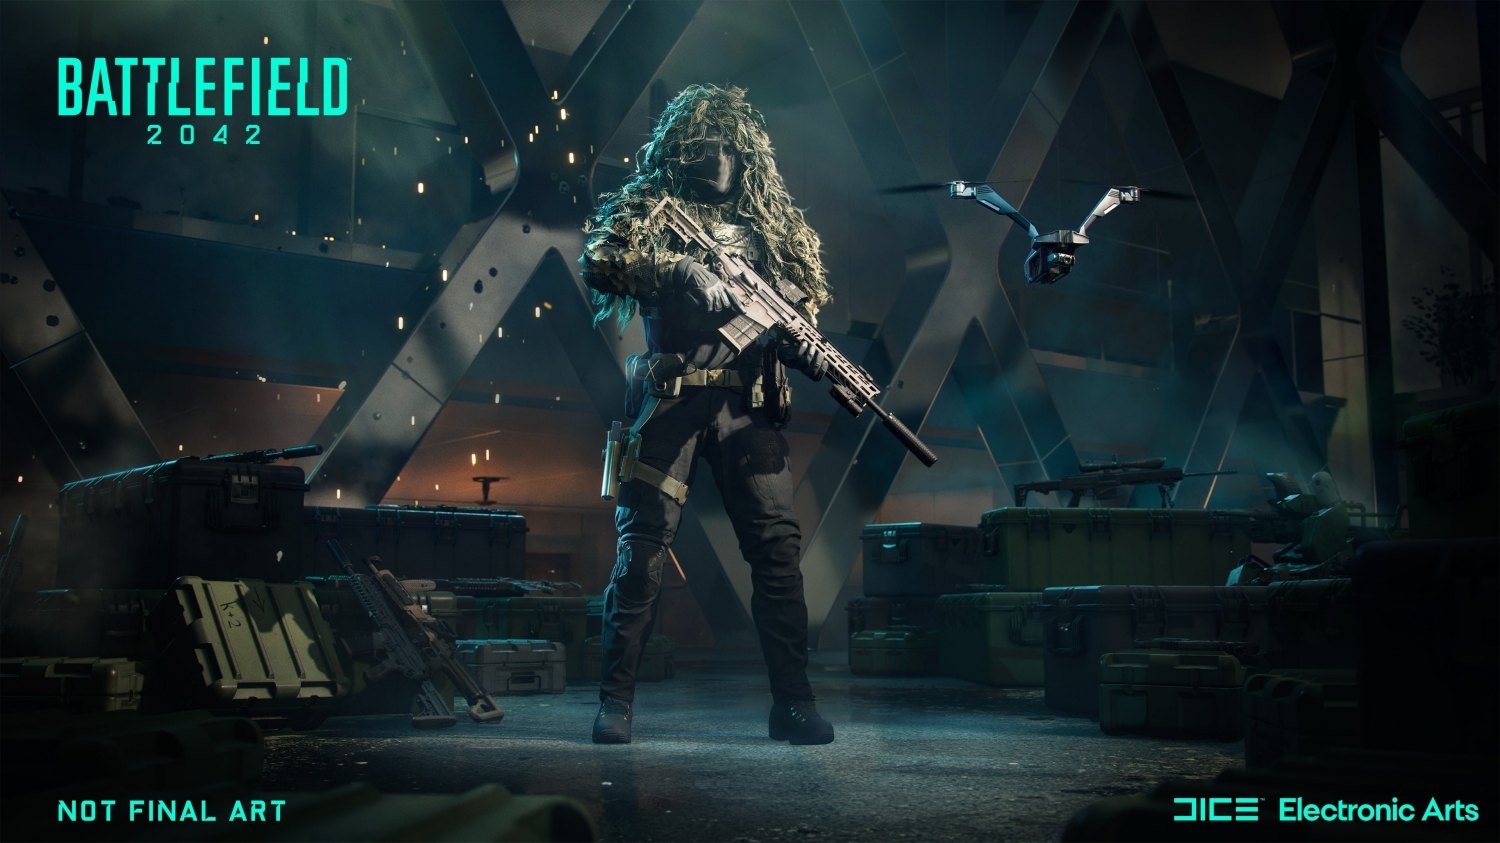 Battlefield 2042 post explains cross-play and aims to answer